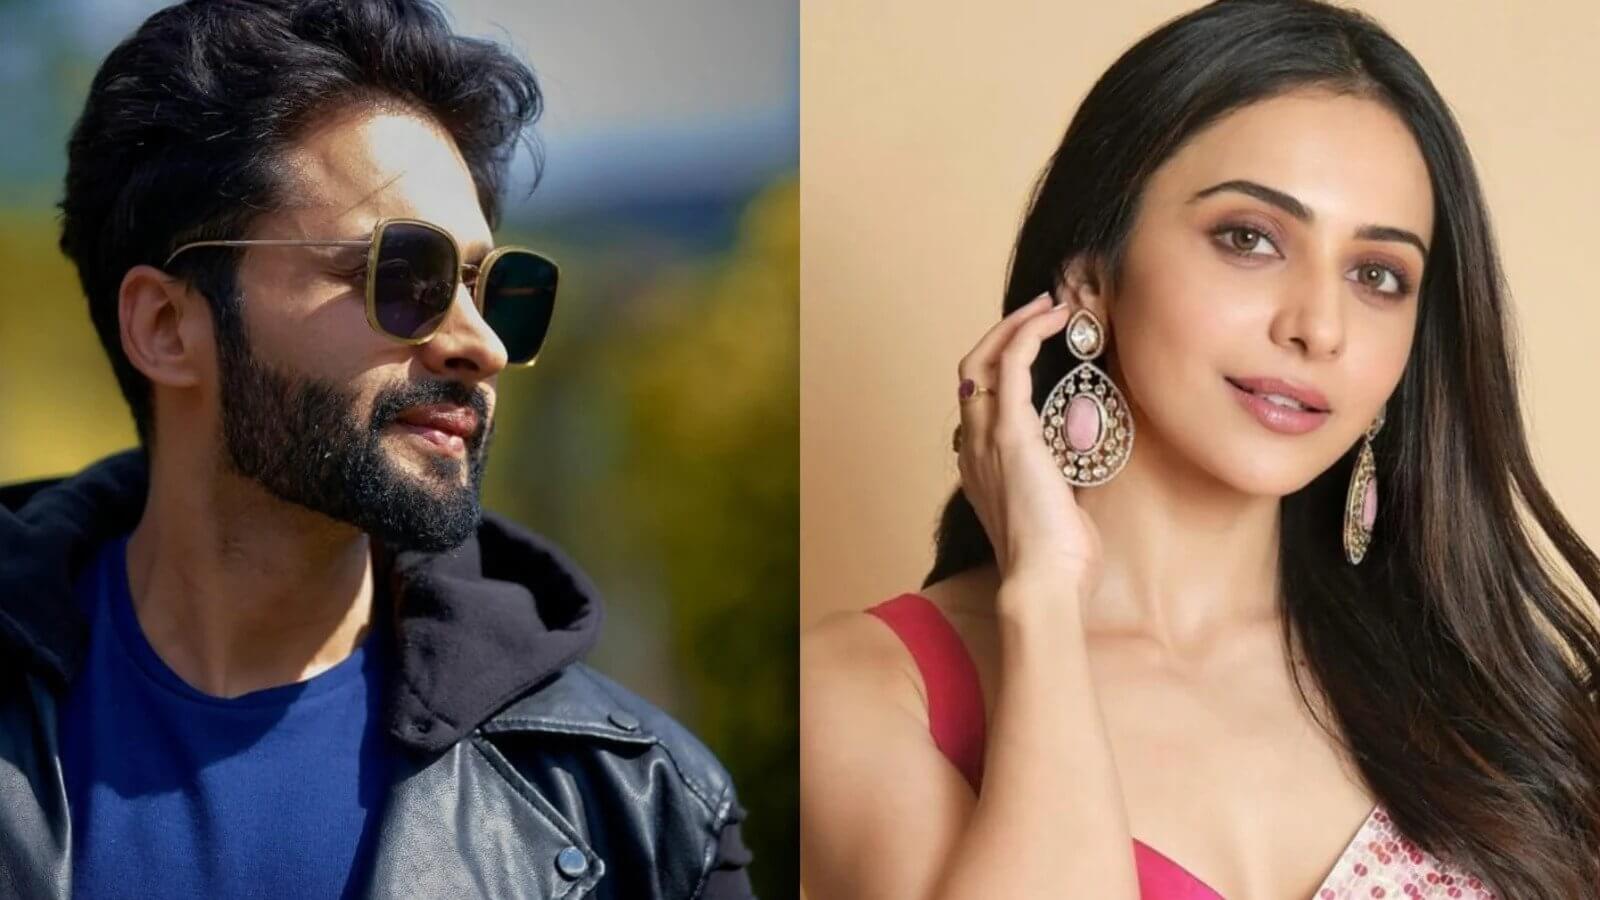 Rakul Preet Singh announced her relationship with Jackky Bhagnani